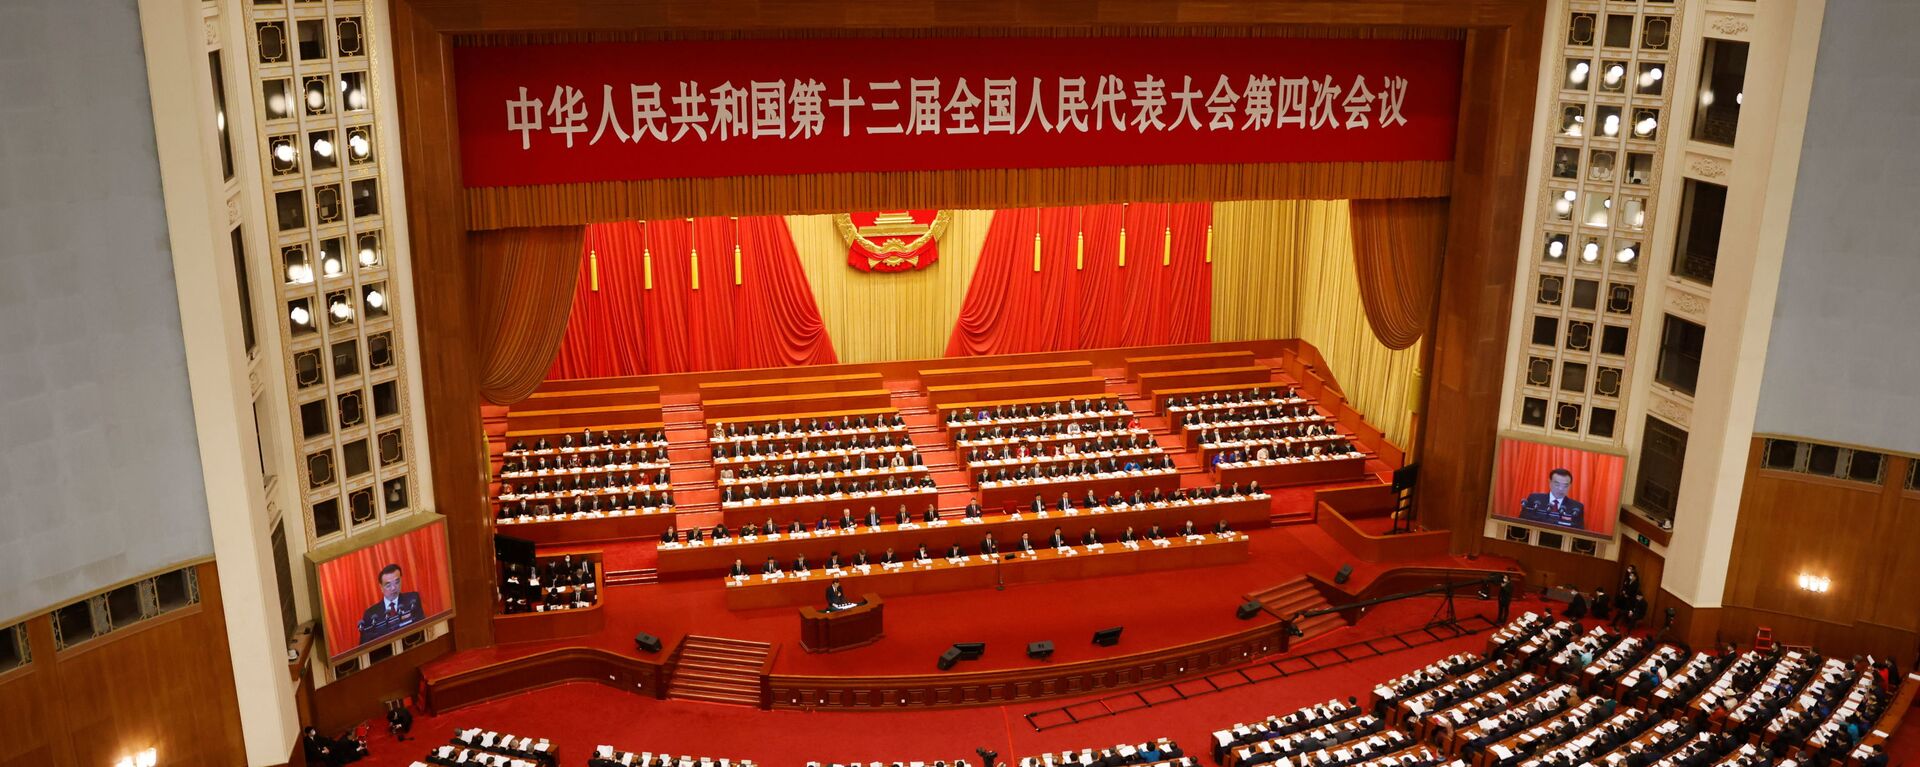 Chinese Premier Li Keqiang speaks at the opening session of the National People's Congress (NPC) at the Great Hall of the People in Beijing, China March 5, 2021. - Sputnik International, 1920, 13.08.2021